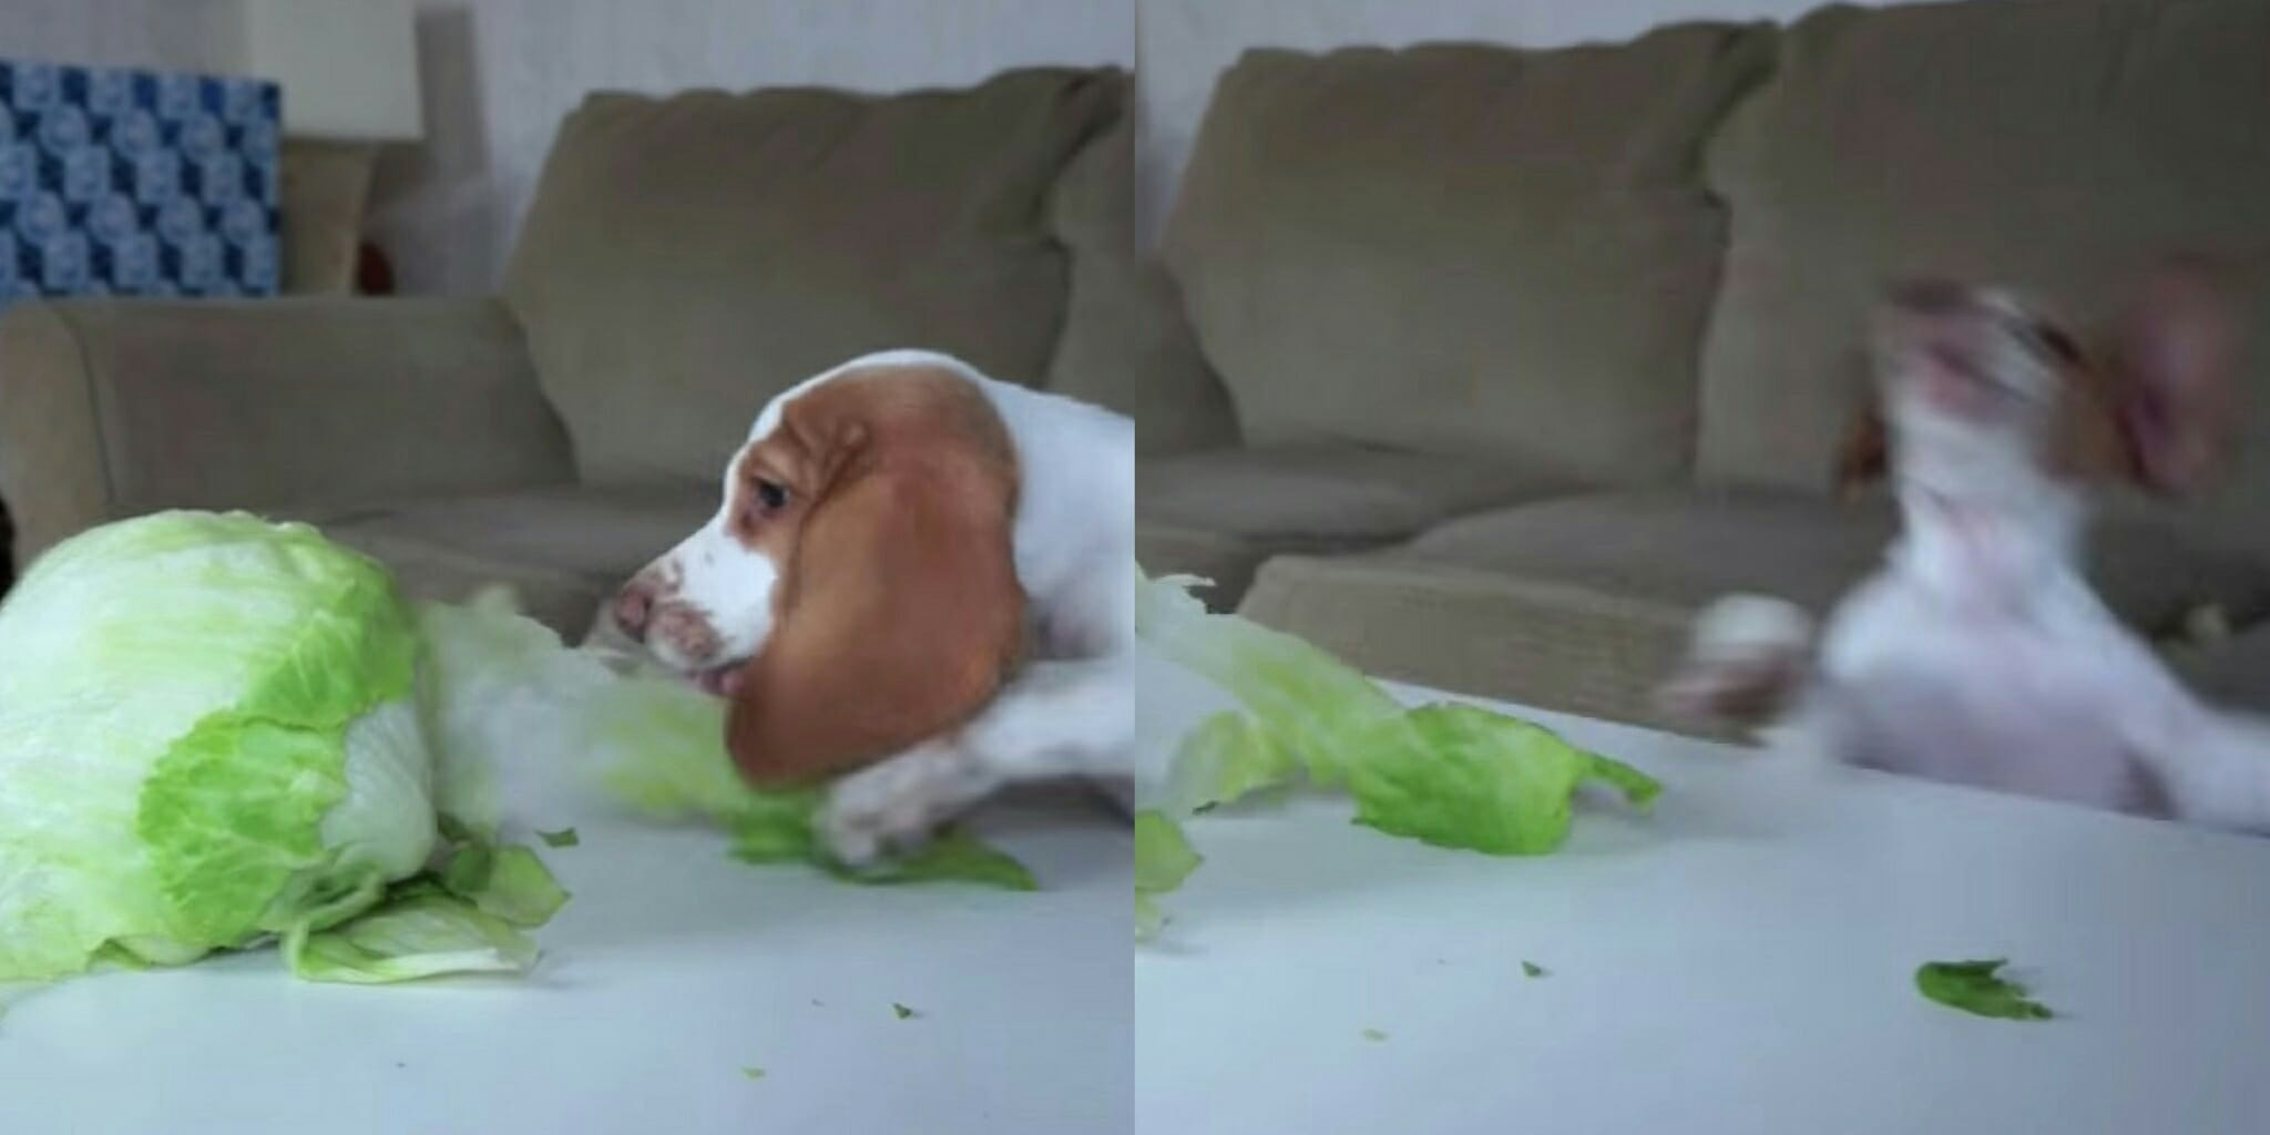 A clumsy puppy tries to eat lettuce but falls off the table